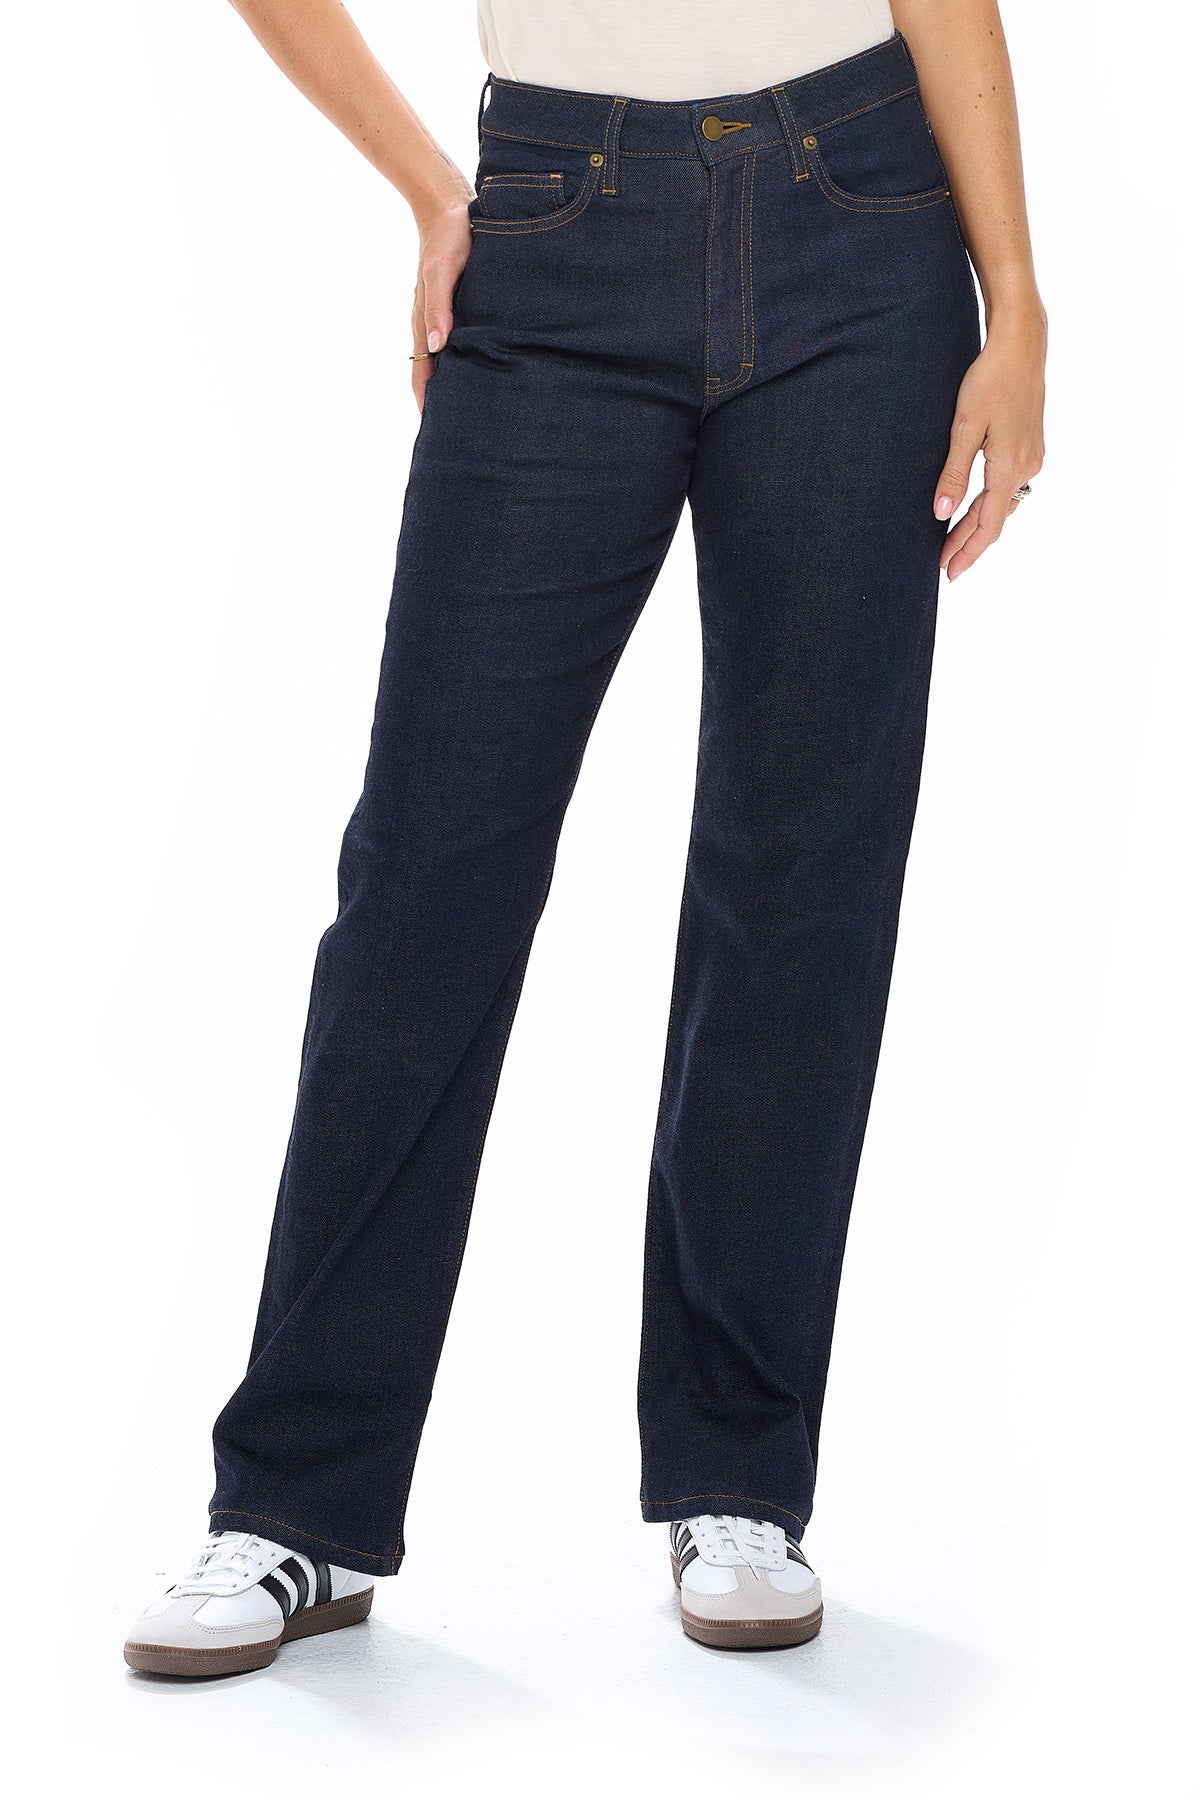 Best Travel Jeans | Concorde | Relaxed